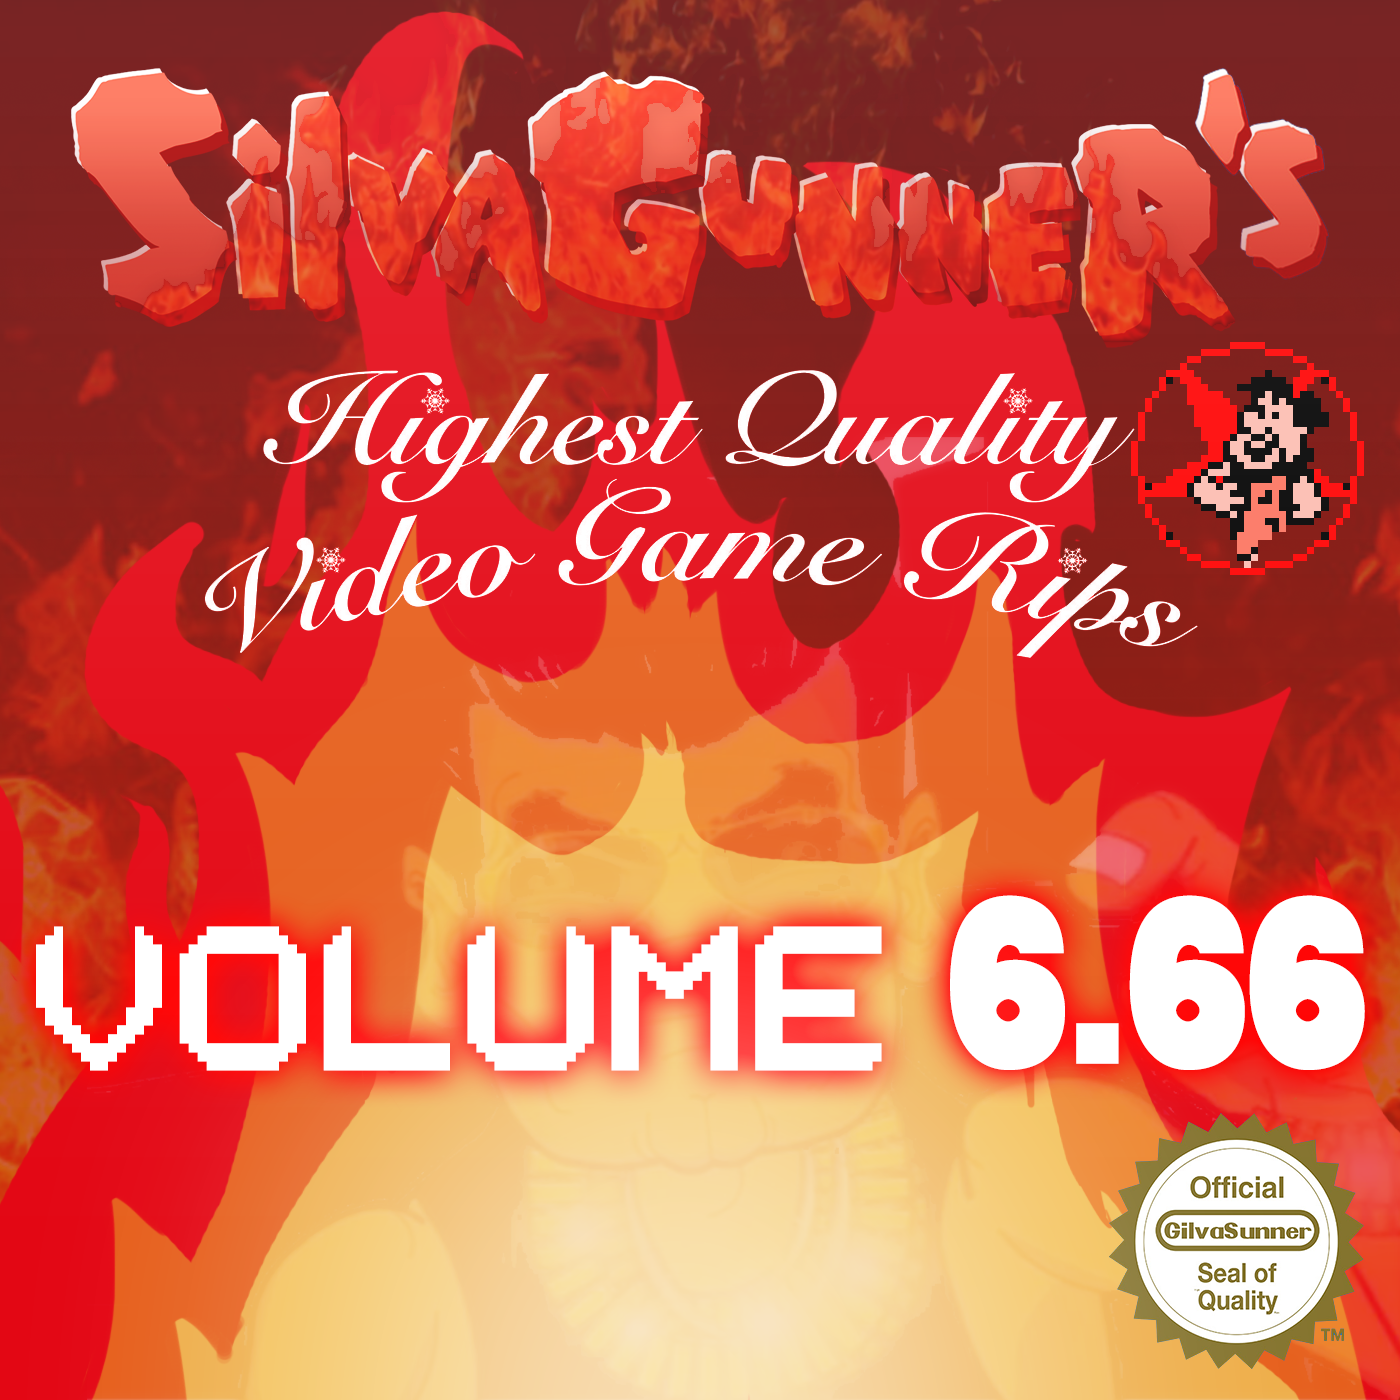 SiIvaGunner's Highest Quality Rips: Volume for Wii U